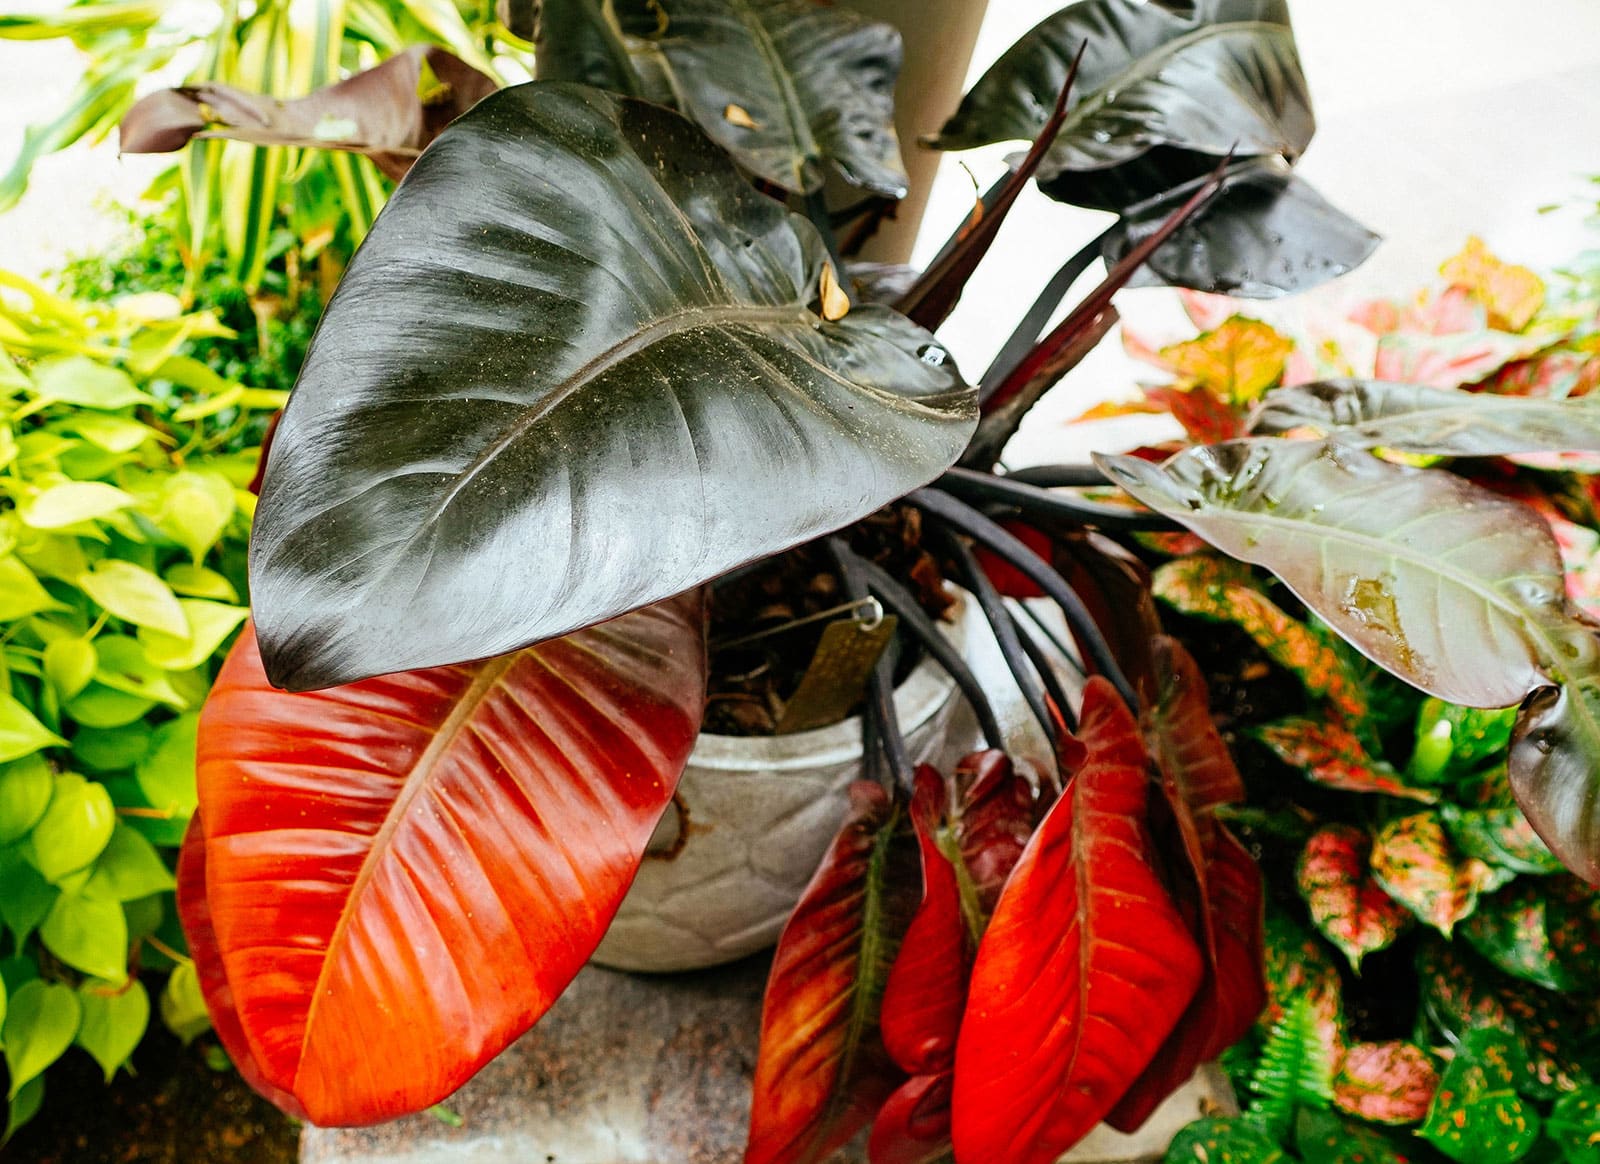 Philodendron 'Black Cardinal' houseplant in a ceramic pot, shot outside amongst other plants